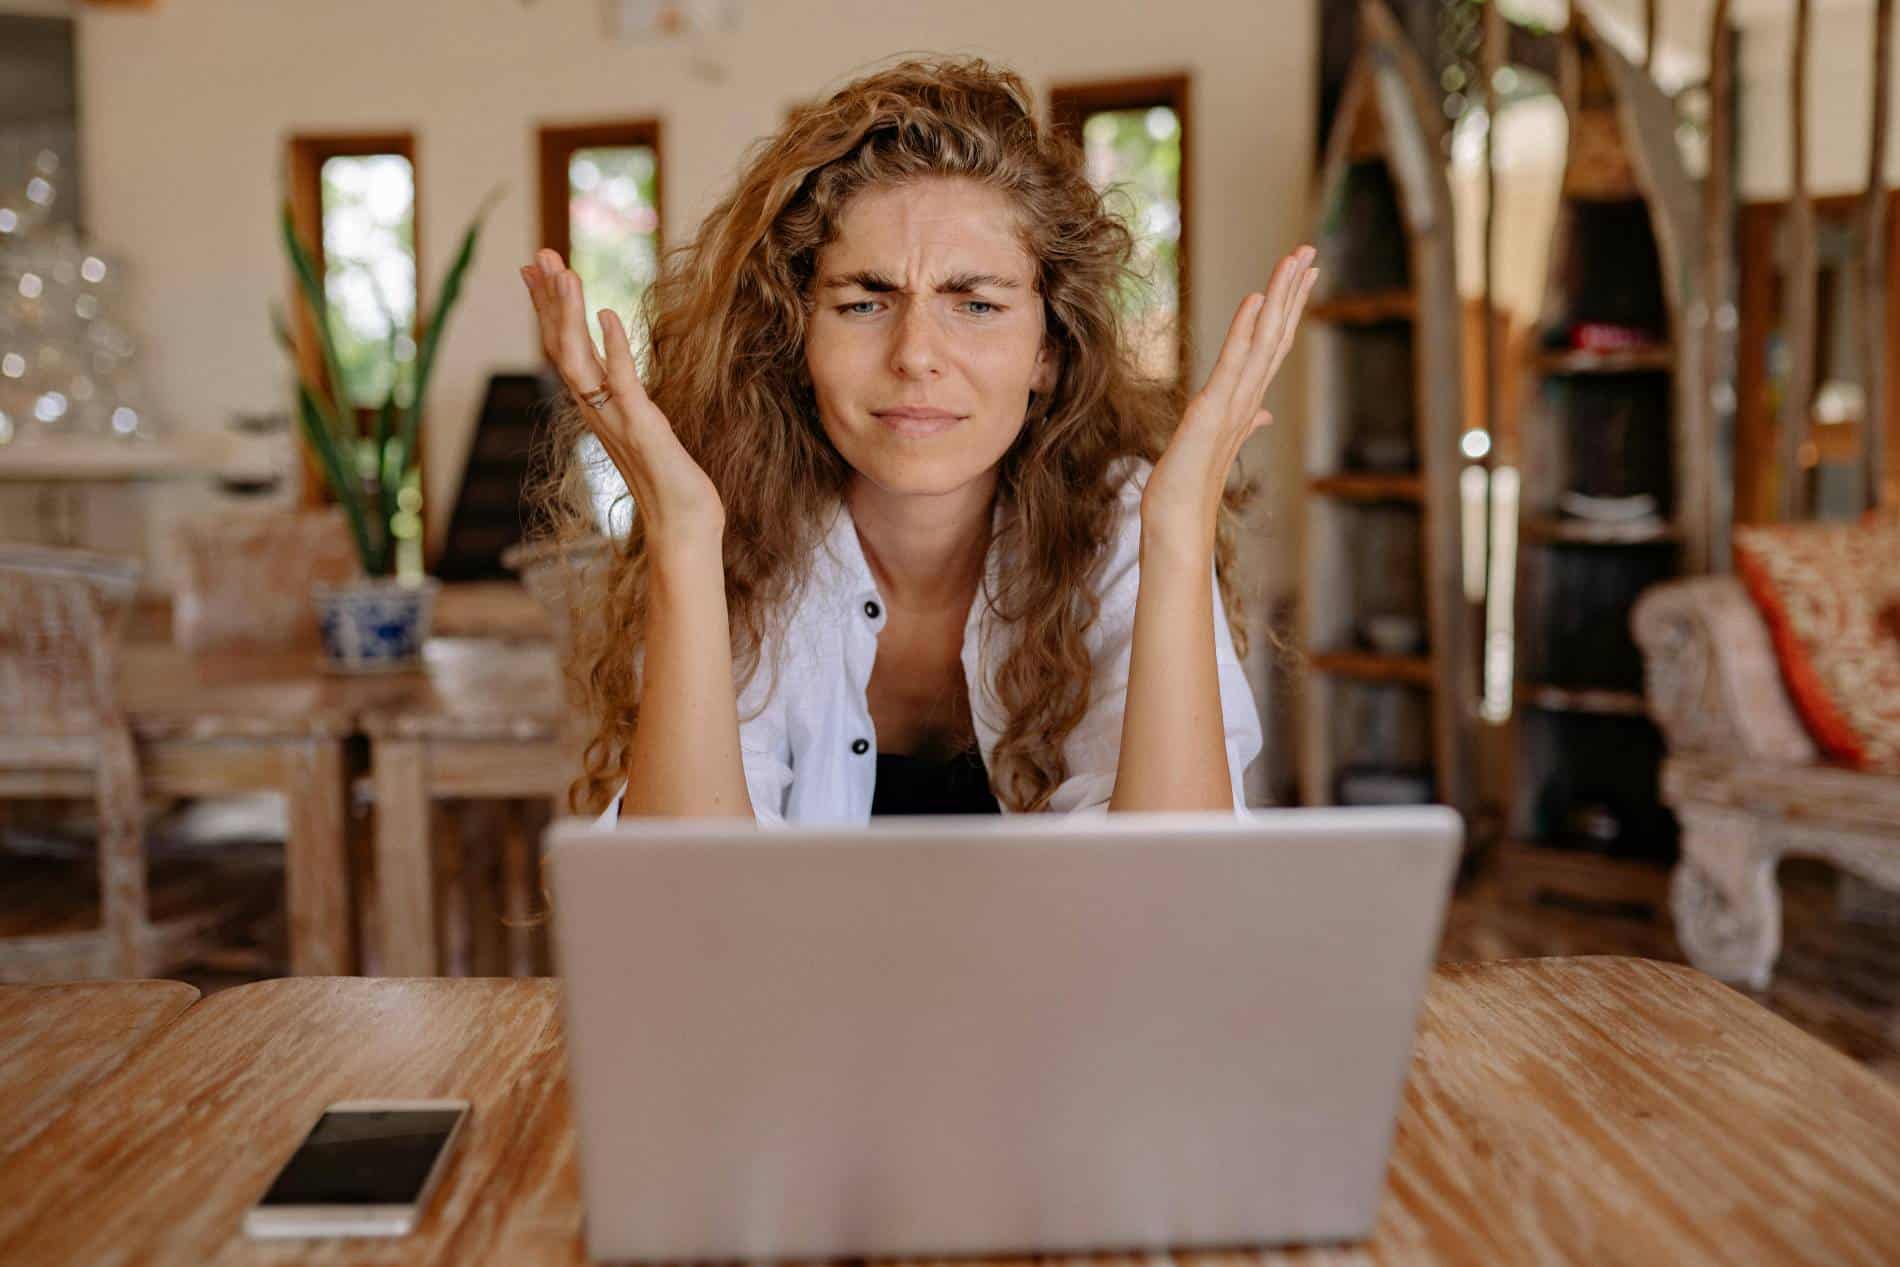 A frustrated looking woman sits in front of a laptop computer, making a face with her hands in the air.